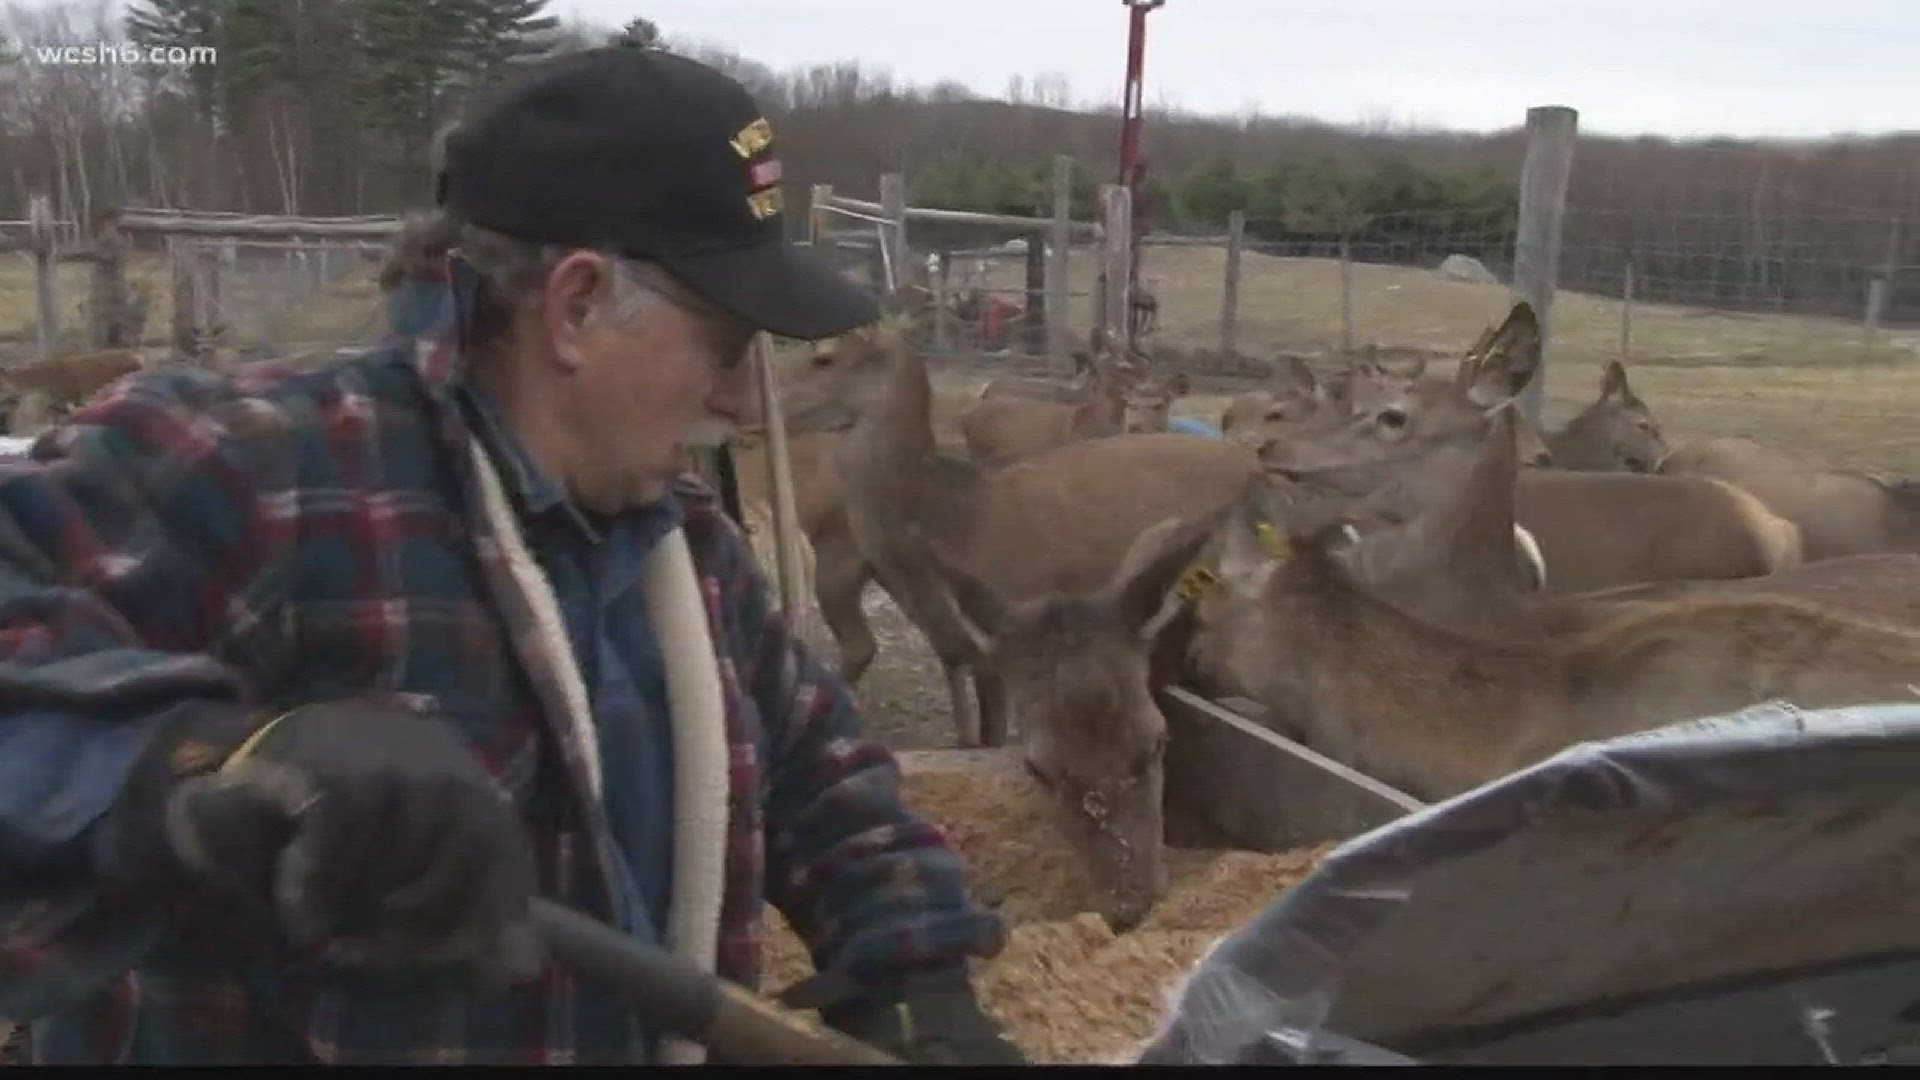 Edgar and Patricia Dolbec have been farming red deer for their antlers at Applegate Deer Farm since 1999.